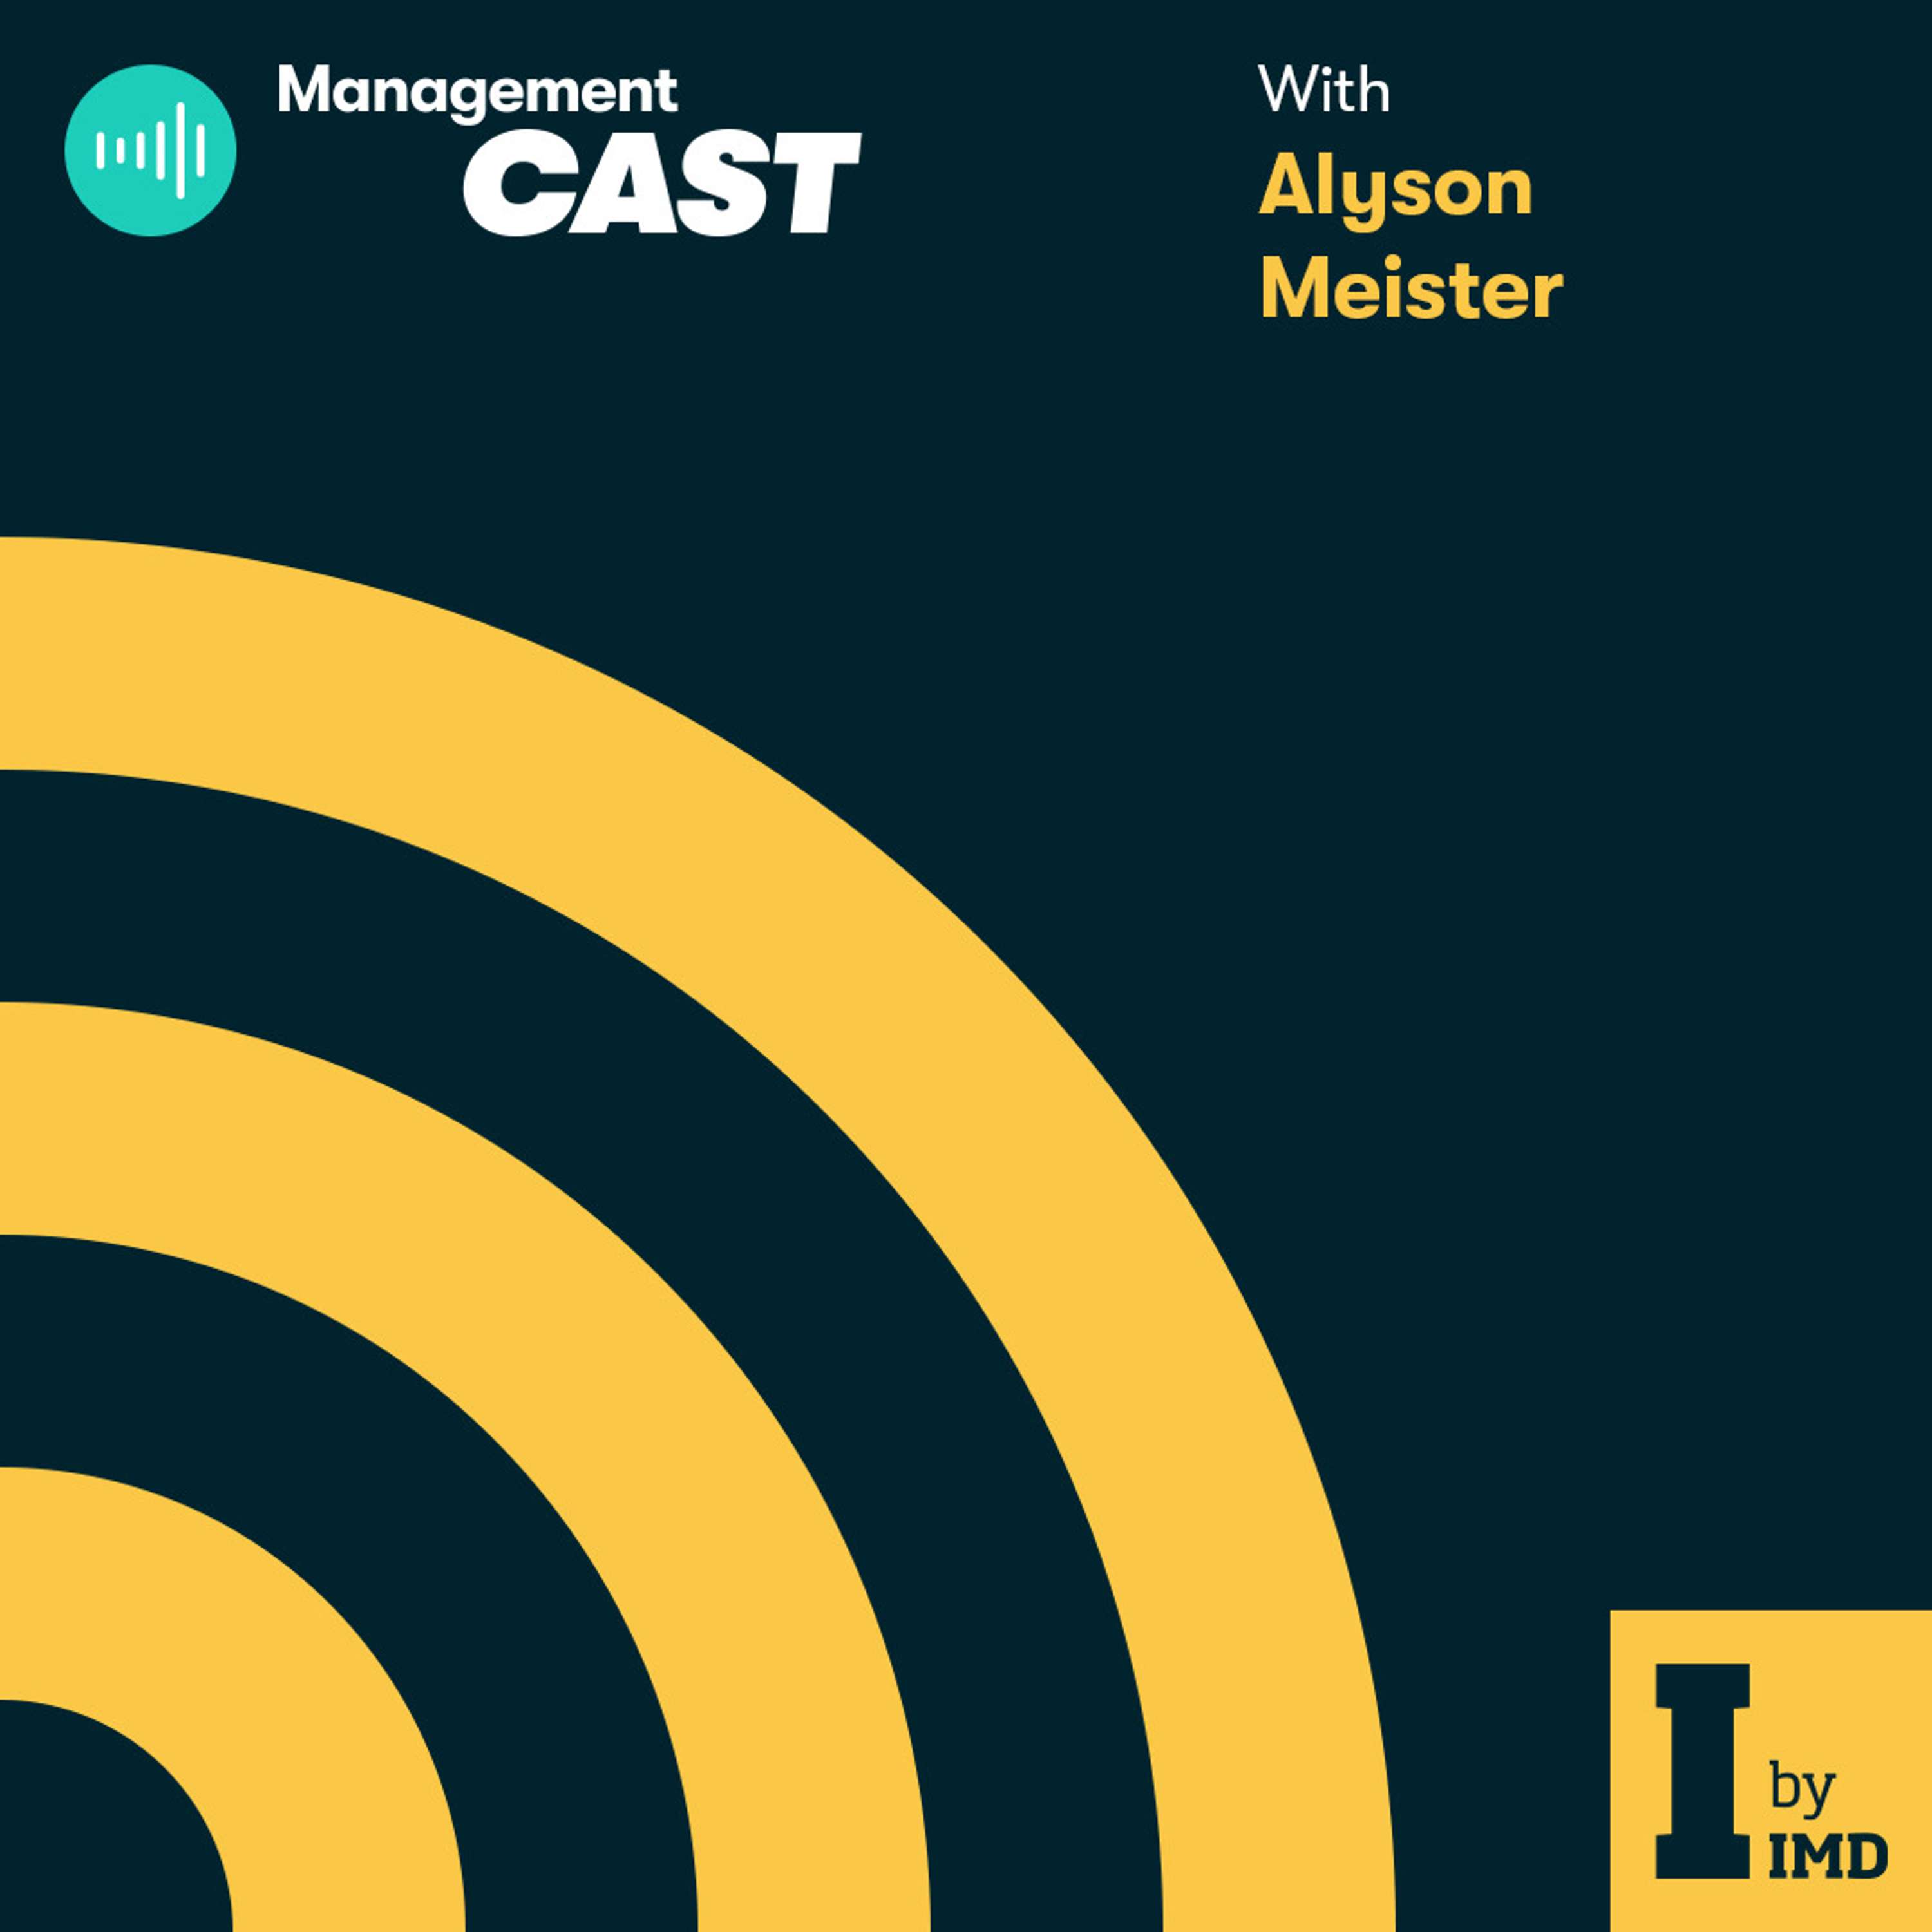 What will workplace wellbeing look like in the future? With Alysson Meister